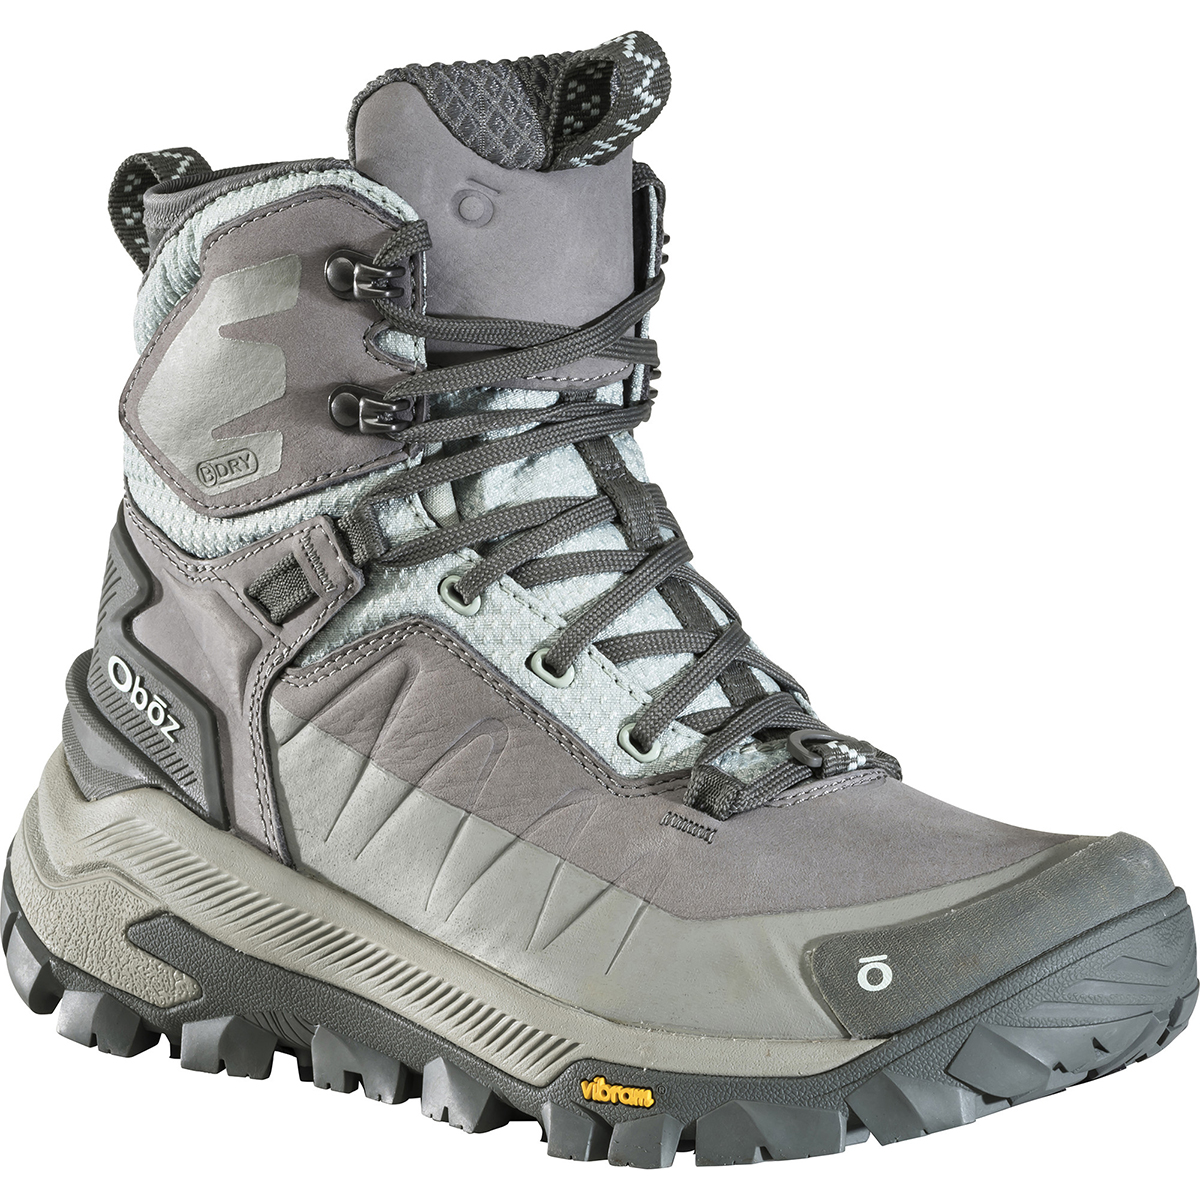 Oboz Women's Bangtail Mid Insulated Waterproof Storm Boots